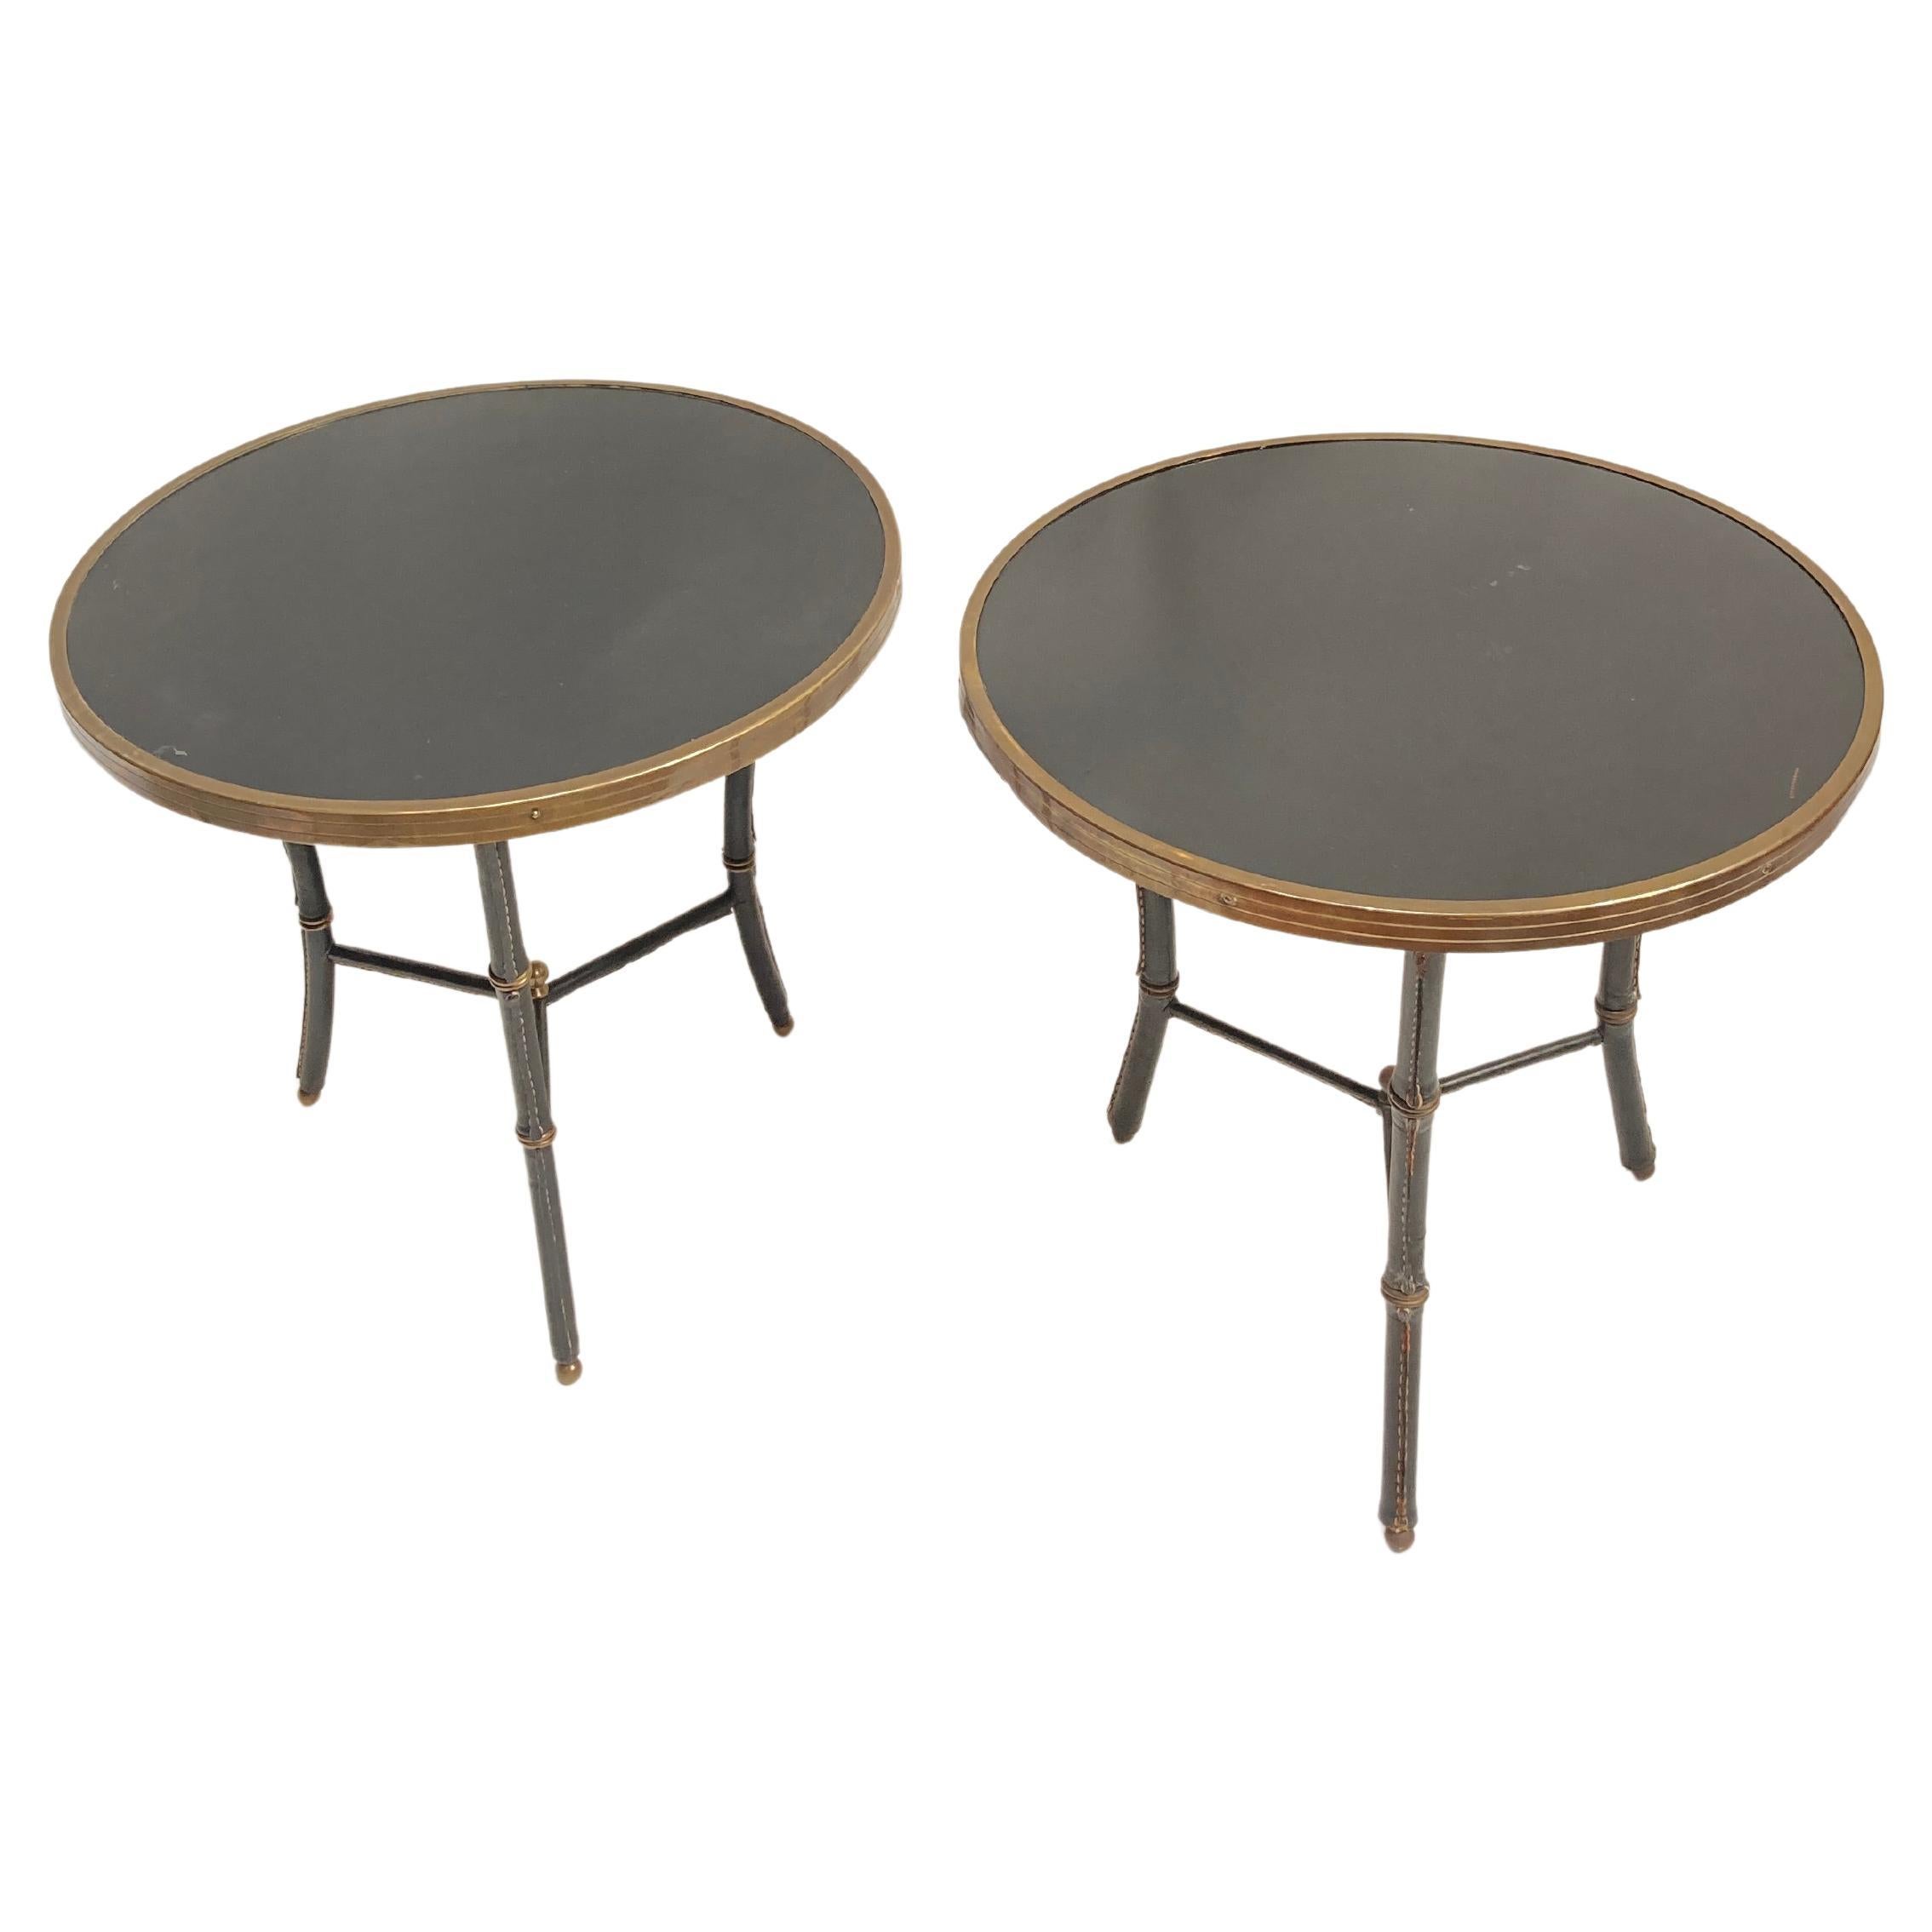 1950's Stitched leather side tables by Jacques Adnet